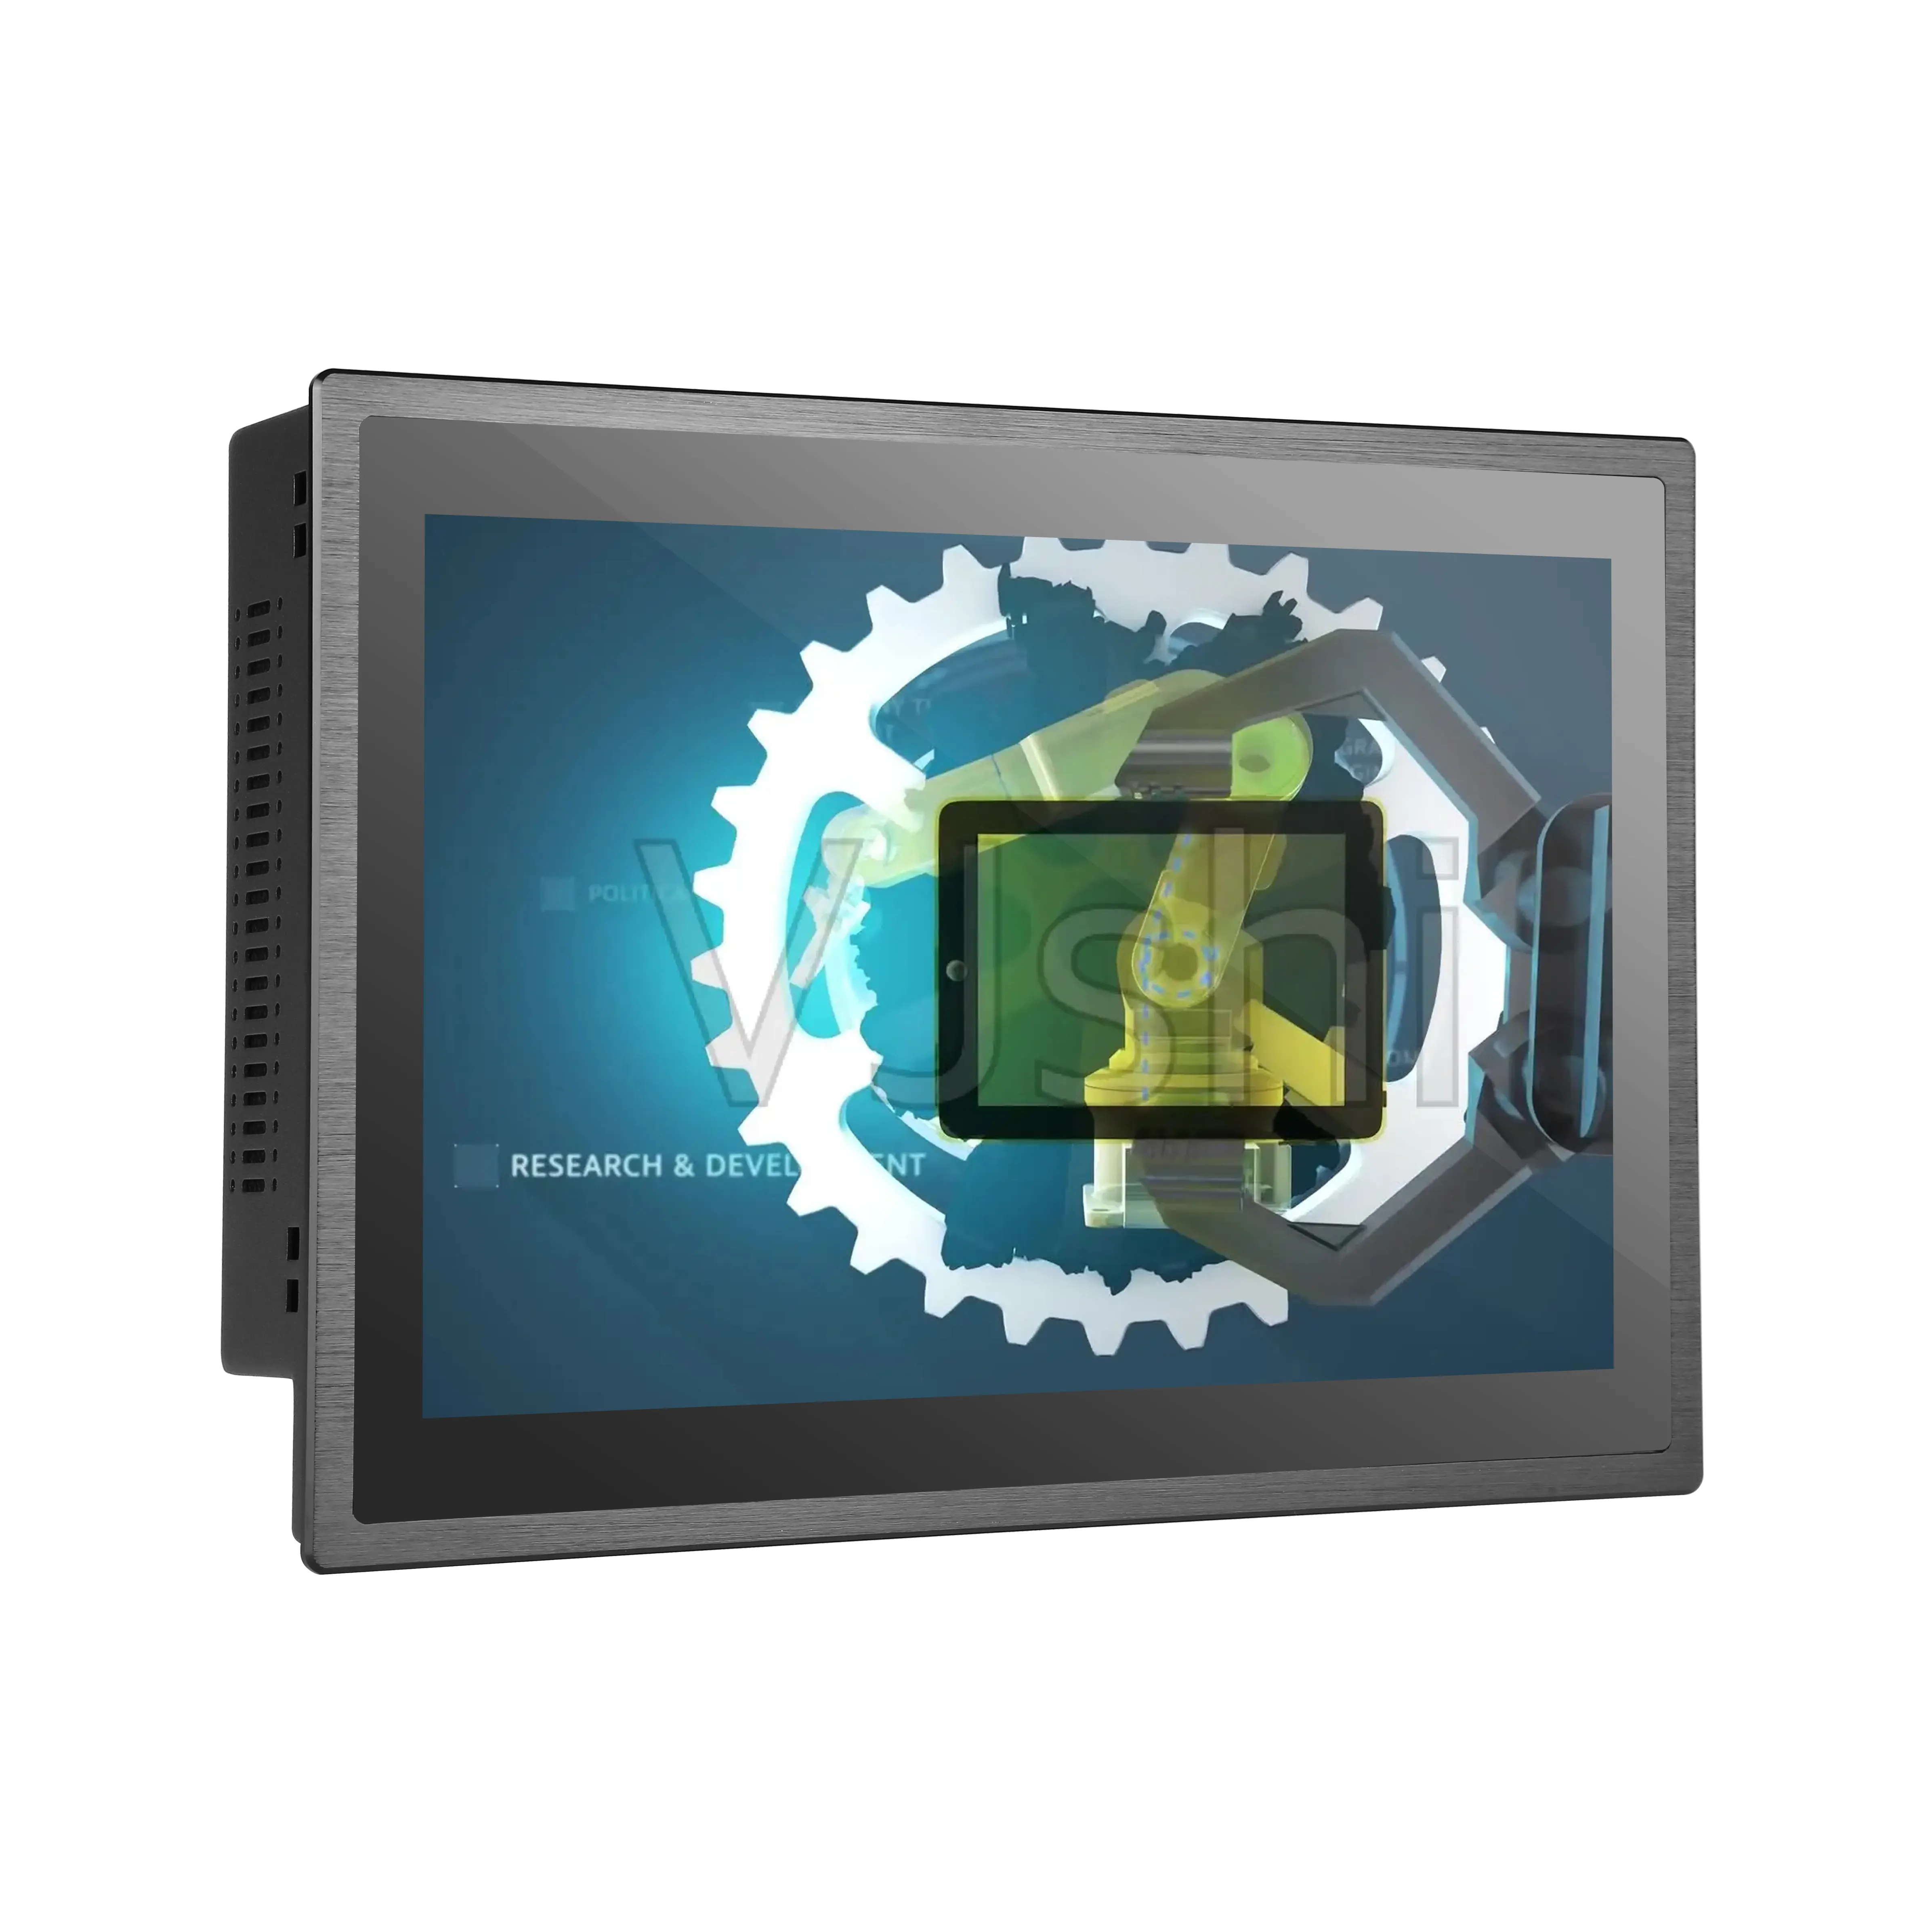 7" inch fanless embedded CNC front panel pc window Linux industrial touch all in one touch computer pc